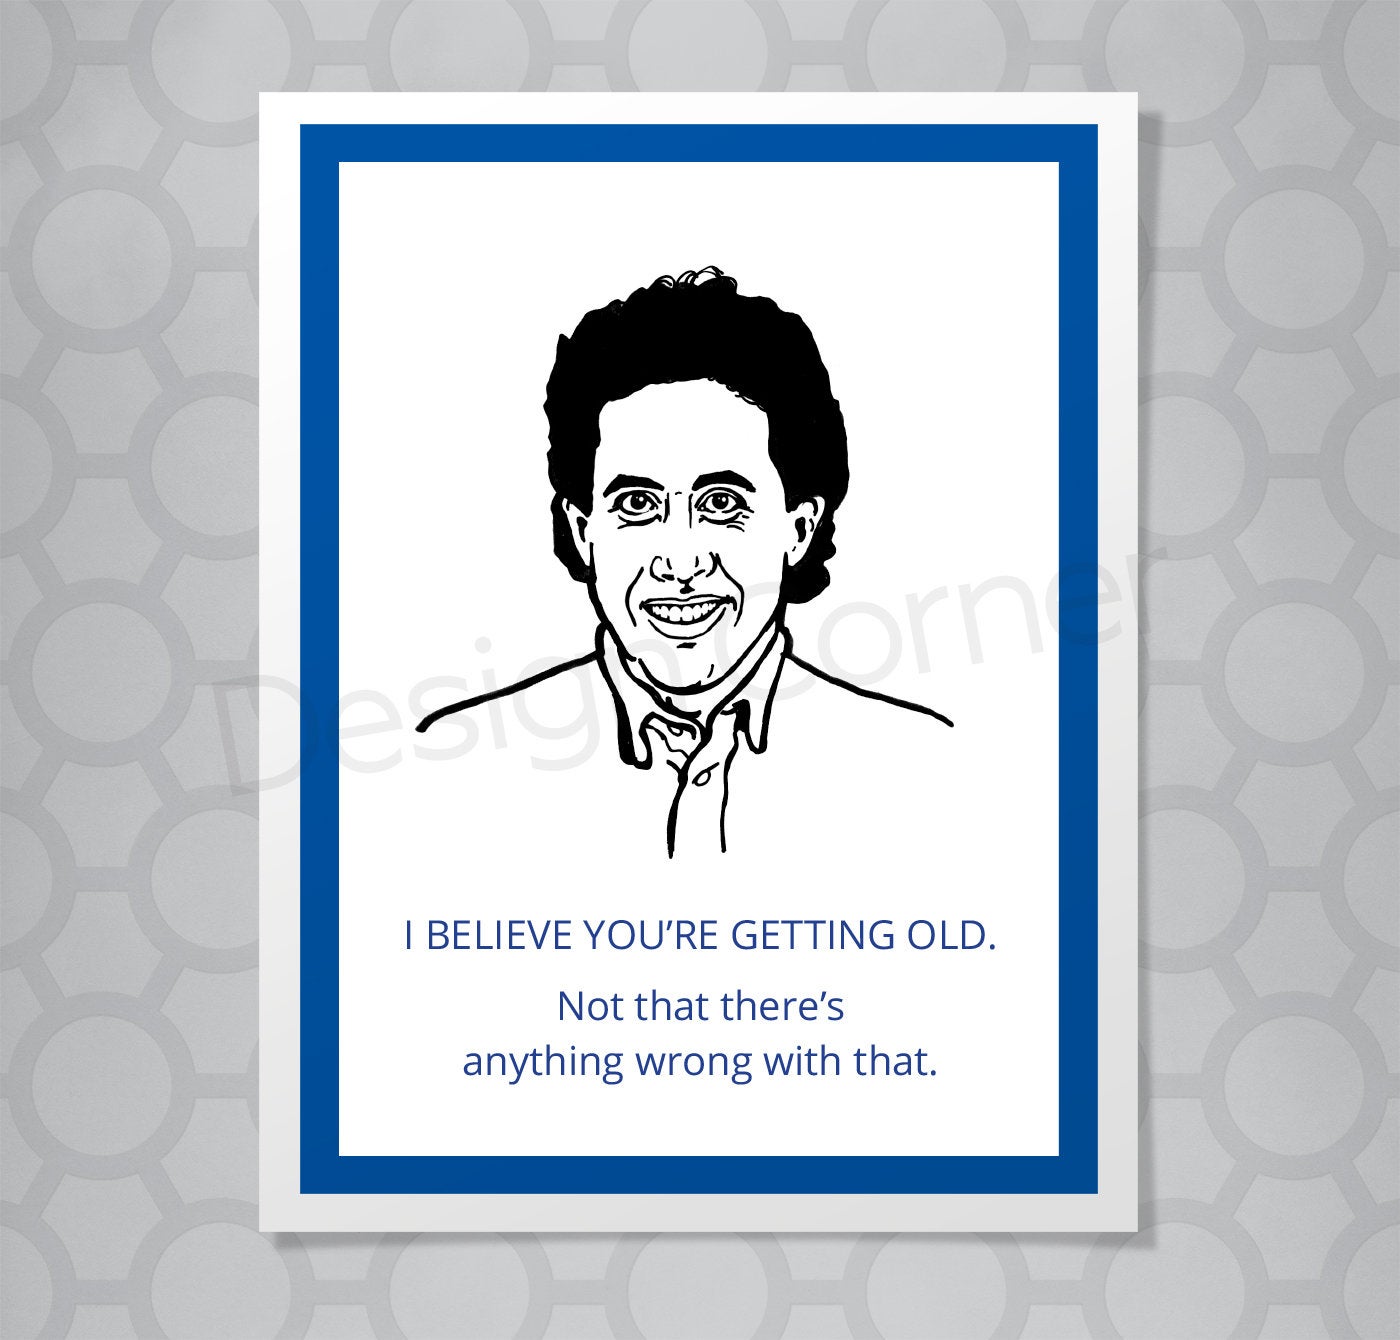 Greeting card with illustration of Seinfeld's Jerry. Caption says "I believe you're getting old. Not that there's anything wrong with that."